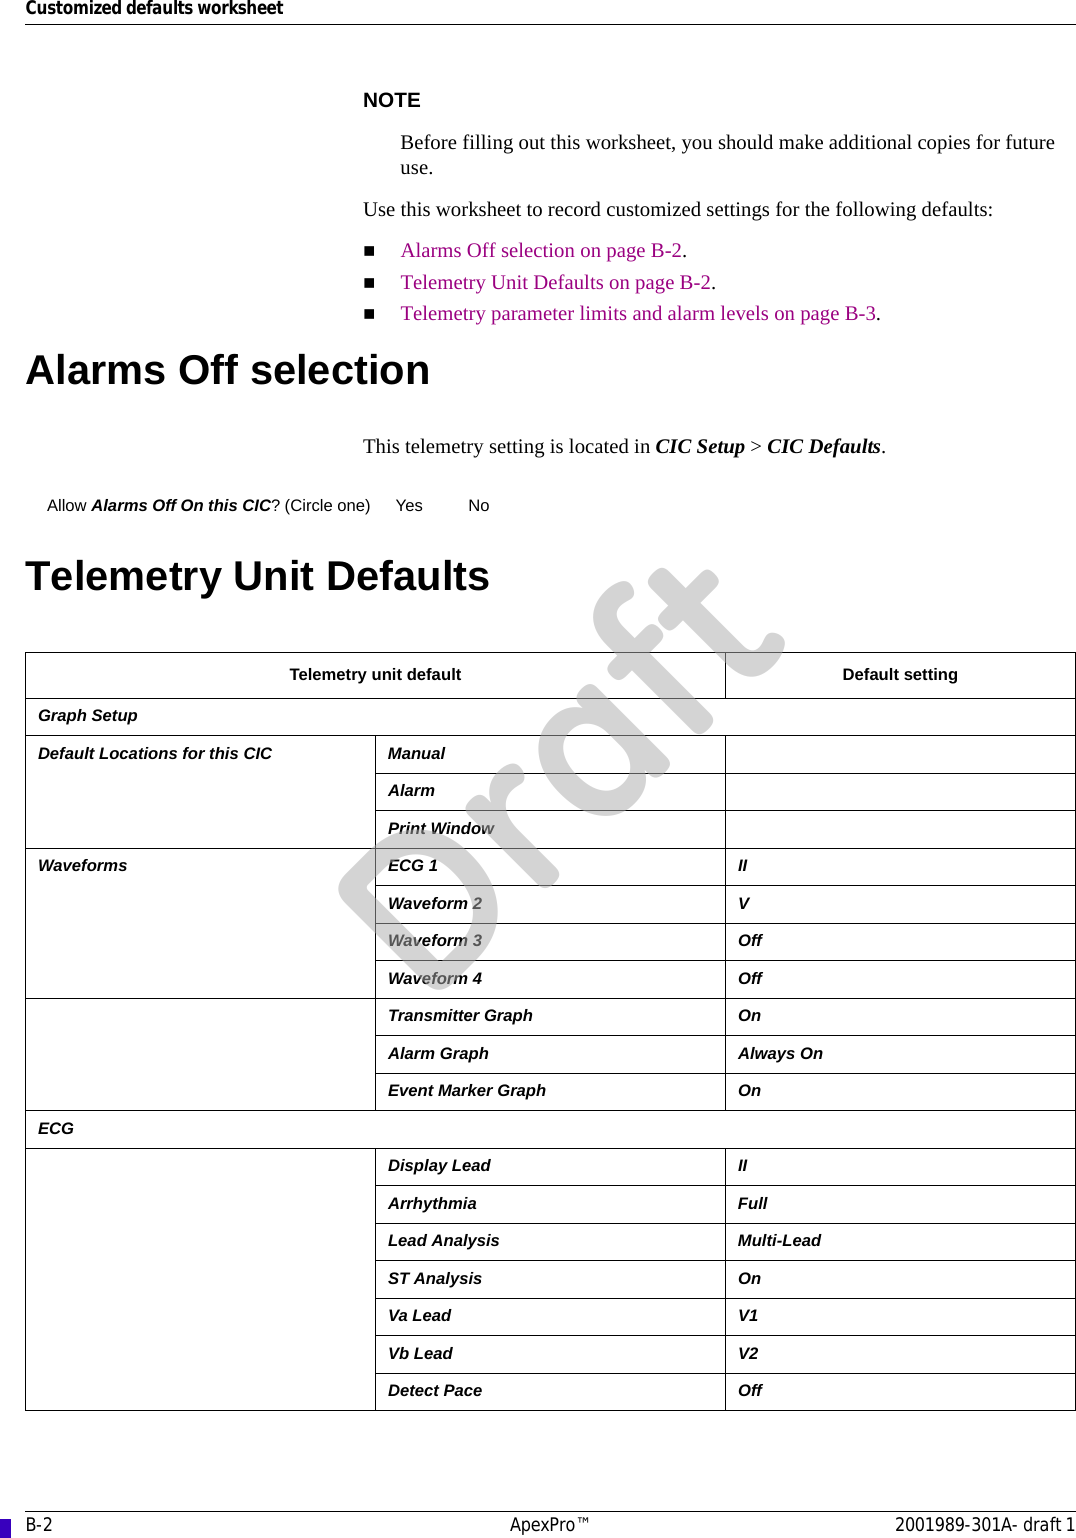 B-2 ApexPro™ 2001989-301A- draft 1Customized defaults worksheetNOTEBefore filling out this worksheet, you should make additional copies for future use.Use this worksheet to record customized settings for the following defaults:Alarms Off selection on page B-2.Telemetry Unit Defaults on page B-2.Telemetry parameter limits and alarm levels on page B-3.Alarms Off selectionThis telemetry setting is located in CIC Setup &gt; CIC Defaults.Telemetry Unit DefaultsAllow Alarms Off On this CIC? (Circle one) Yes NoTelemetry unit default Default settingGraph SetupDefault Locations for this CIC ManualAlarmPrint WindowWaveforms ECG 1 IIWaveform 2 VWaveform 3 OffWaveform 4 OffTransmitter Graph OnAlarm Graph Always OnEvent Marker Graph OnECGDisplay Lead IIArrhythmia FullLead Analysis Multi-LeadST Analysis OnVa Lead V1Vb Lead V2Detect Pace OffDraft